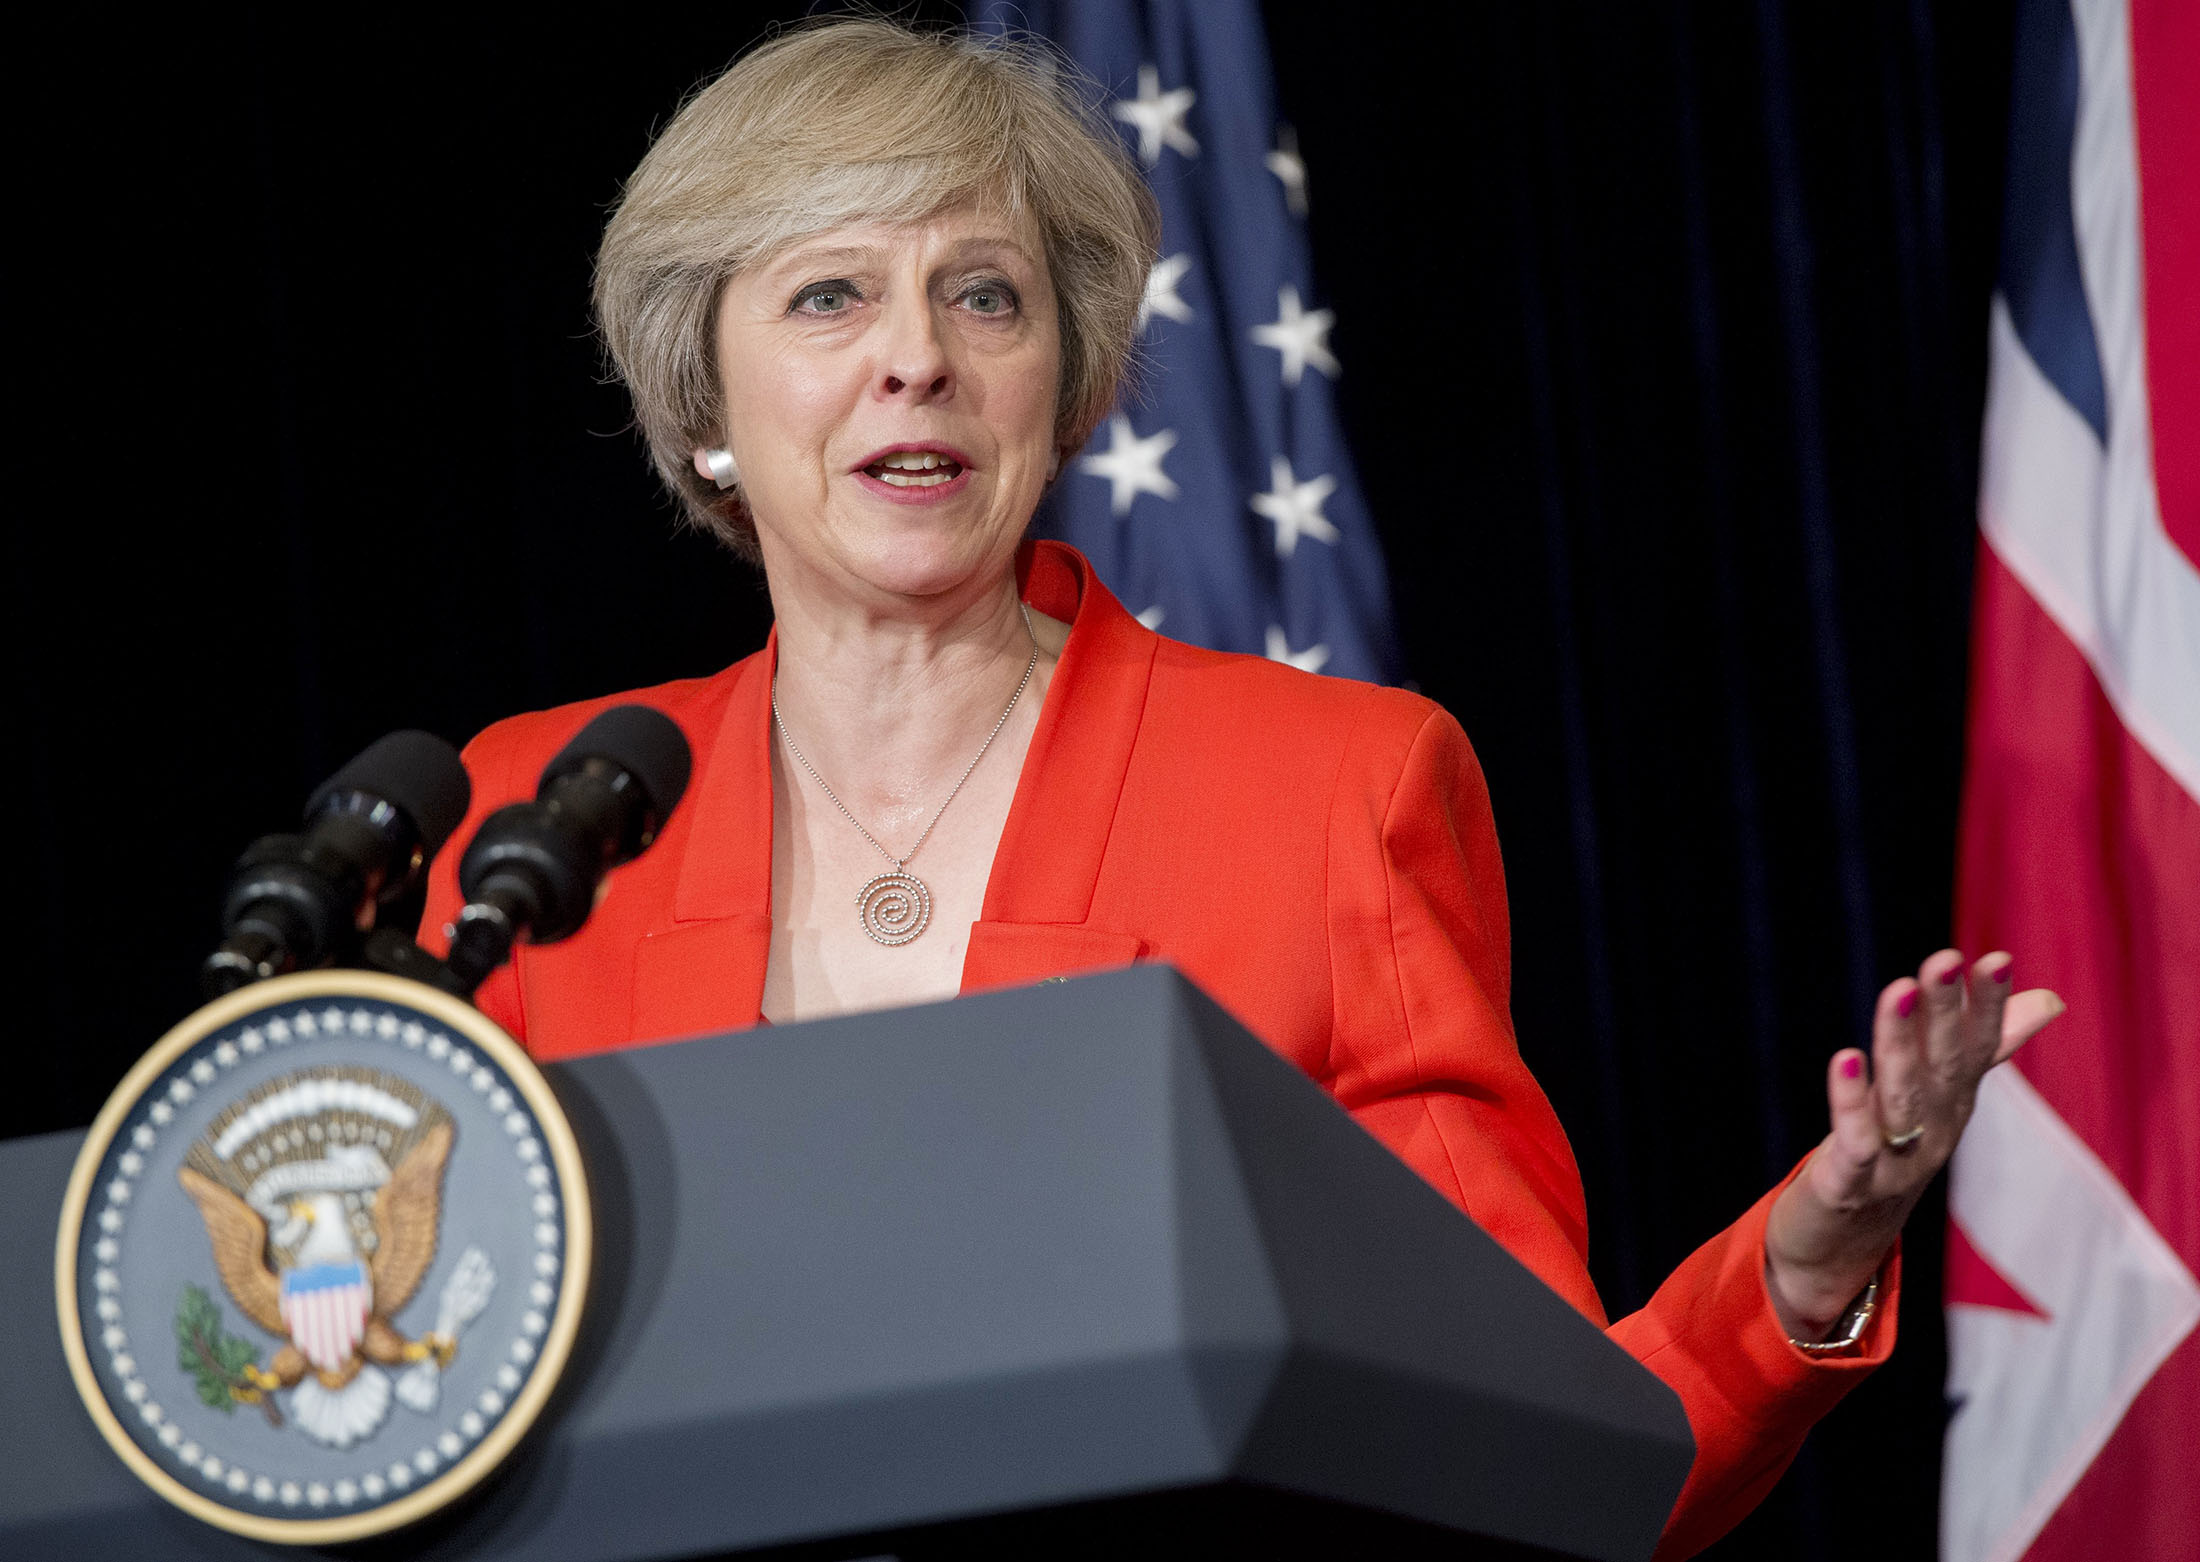 Theresa May speaks during a press conference in Hangzhou, China on Sept. 4.
